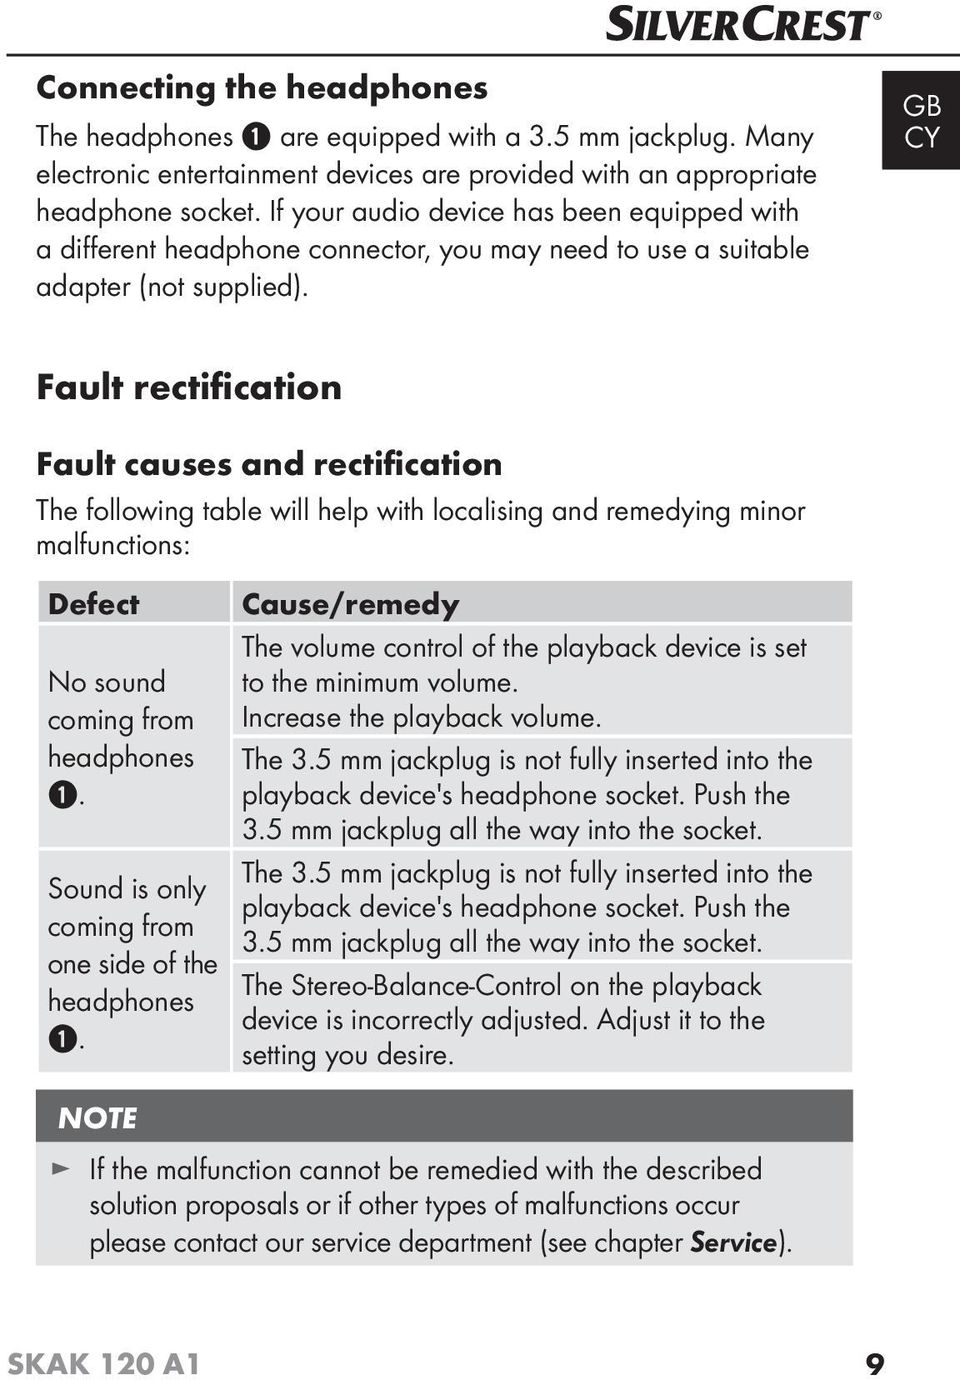 GB Fault rectification Fault causes and rectification The following table will help with localising and remedying minor malfunctions: Defect No sound coming from headphones 1.